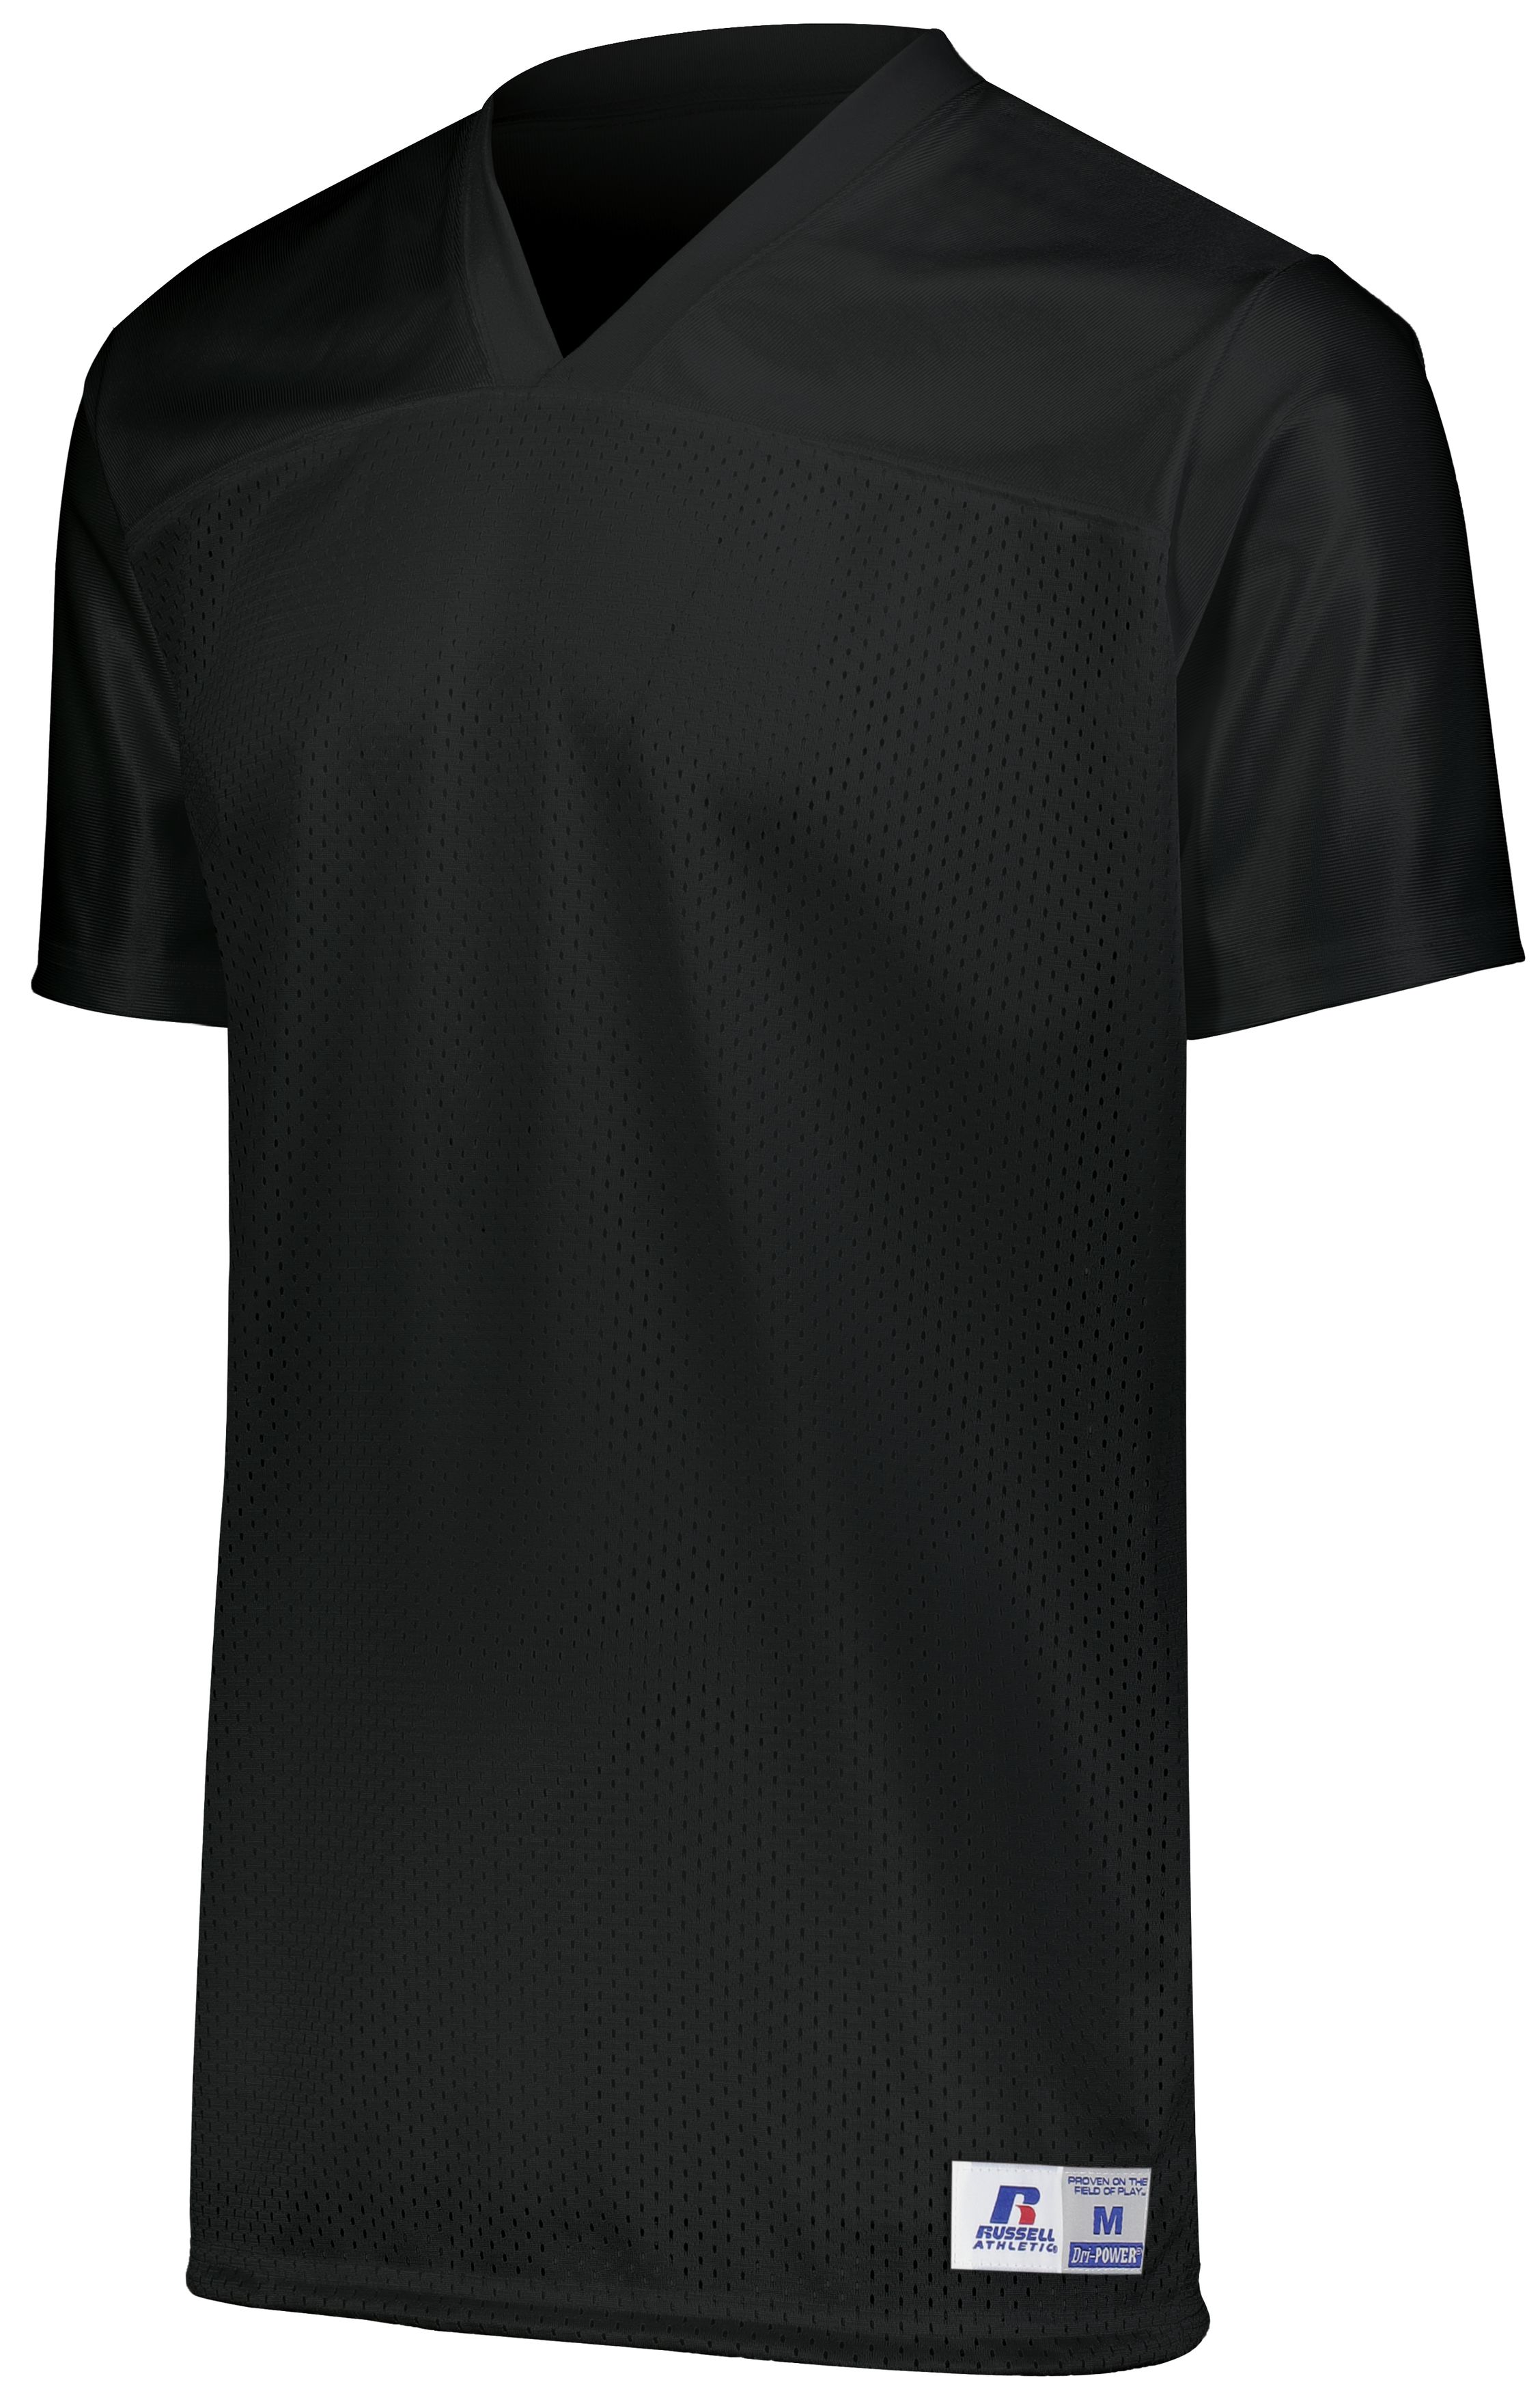 Russell Athletic R0593B - Youth Solid Flag Football Jersey